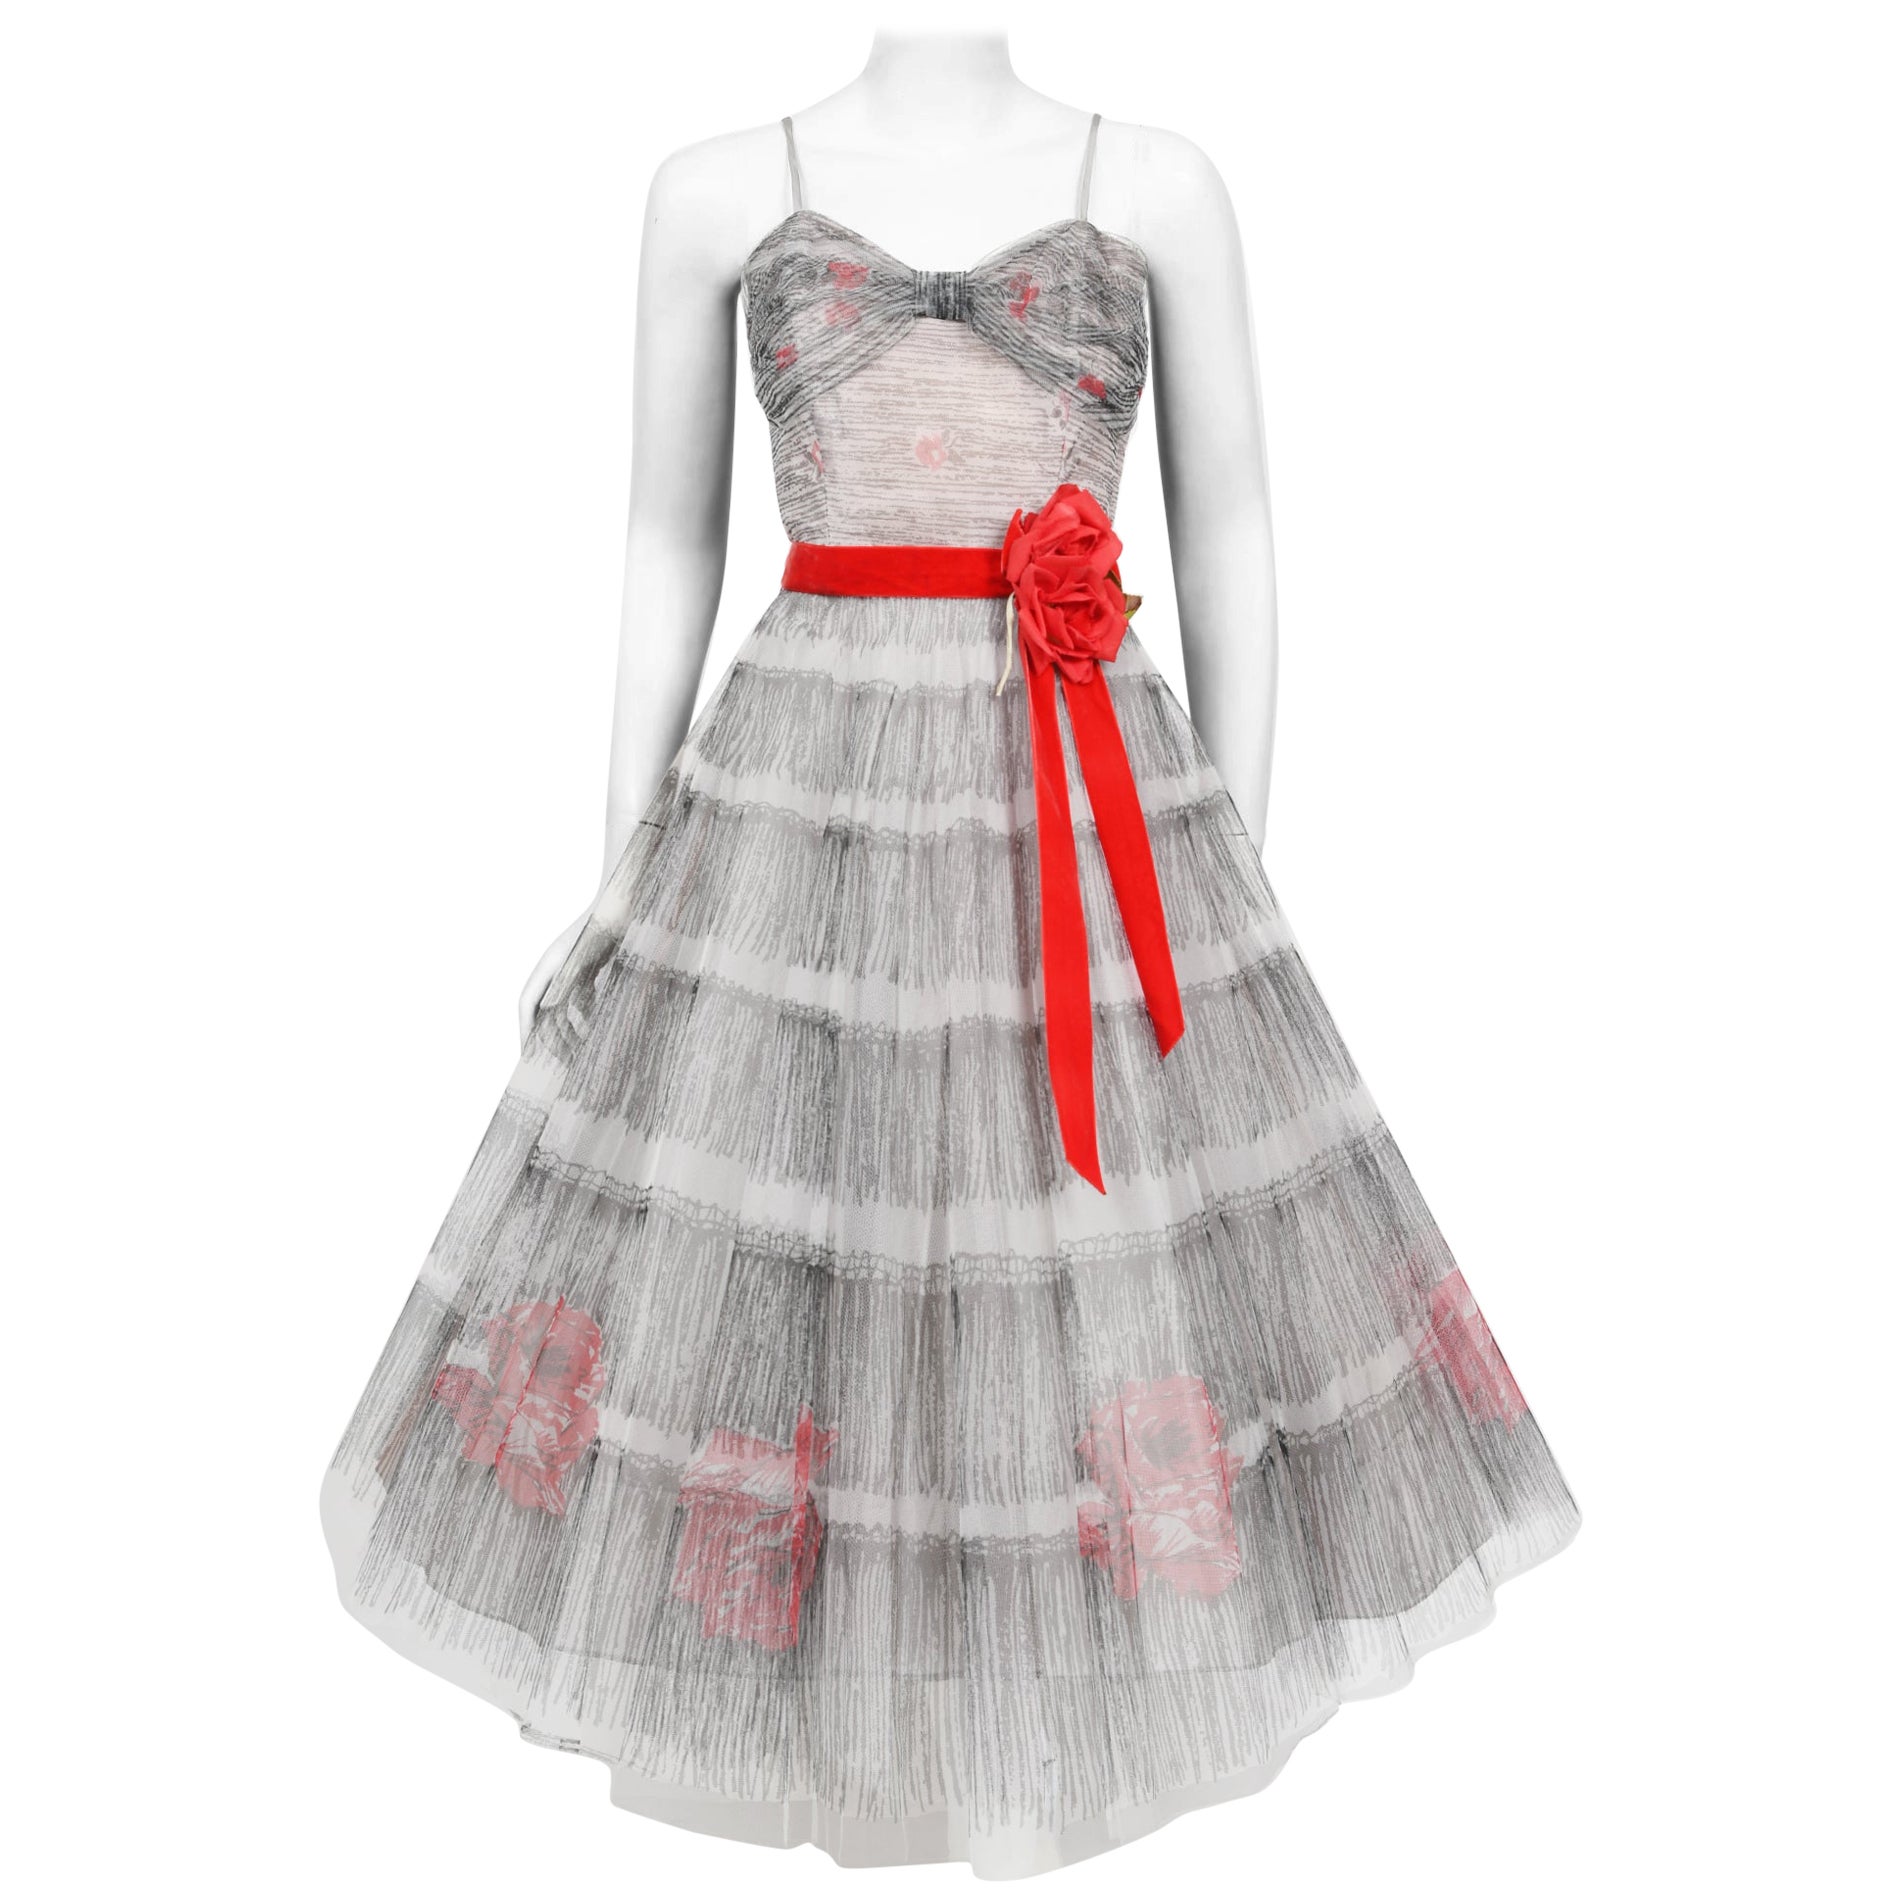 Vintage 1950's Emma Domb Red Roses Illusion Print Tulle Full-Skirt Party Dress For Sale